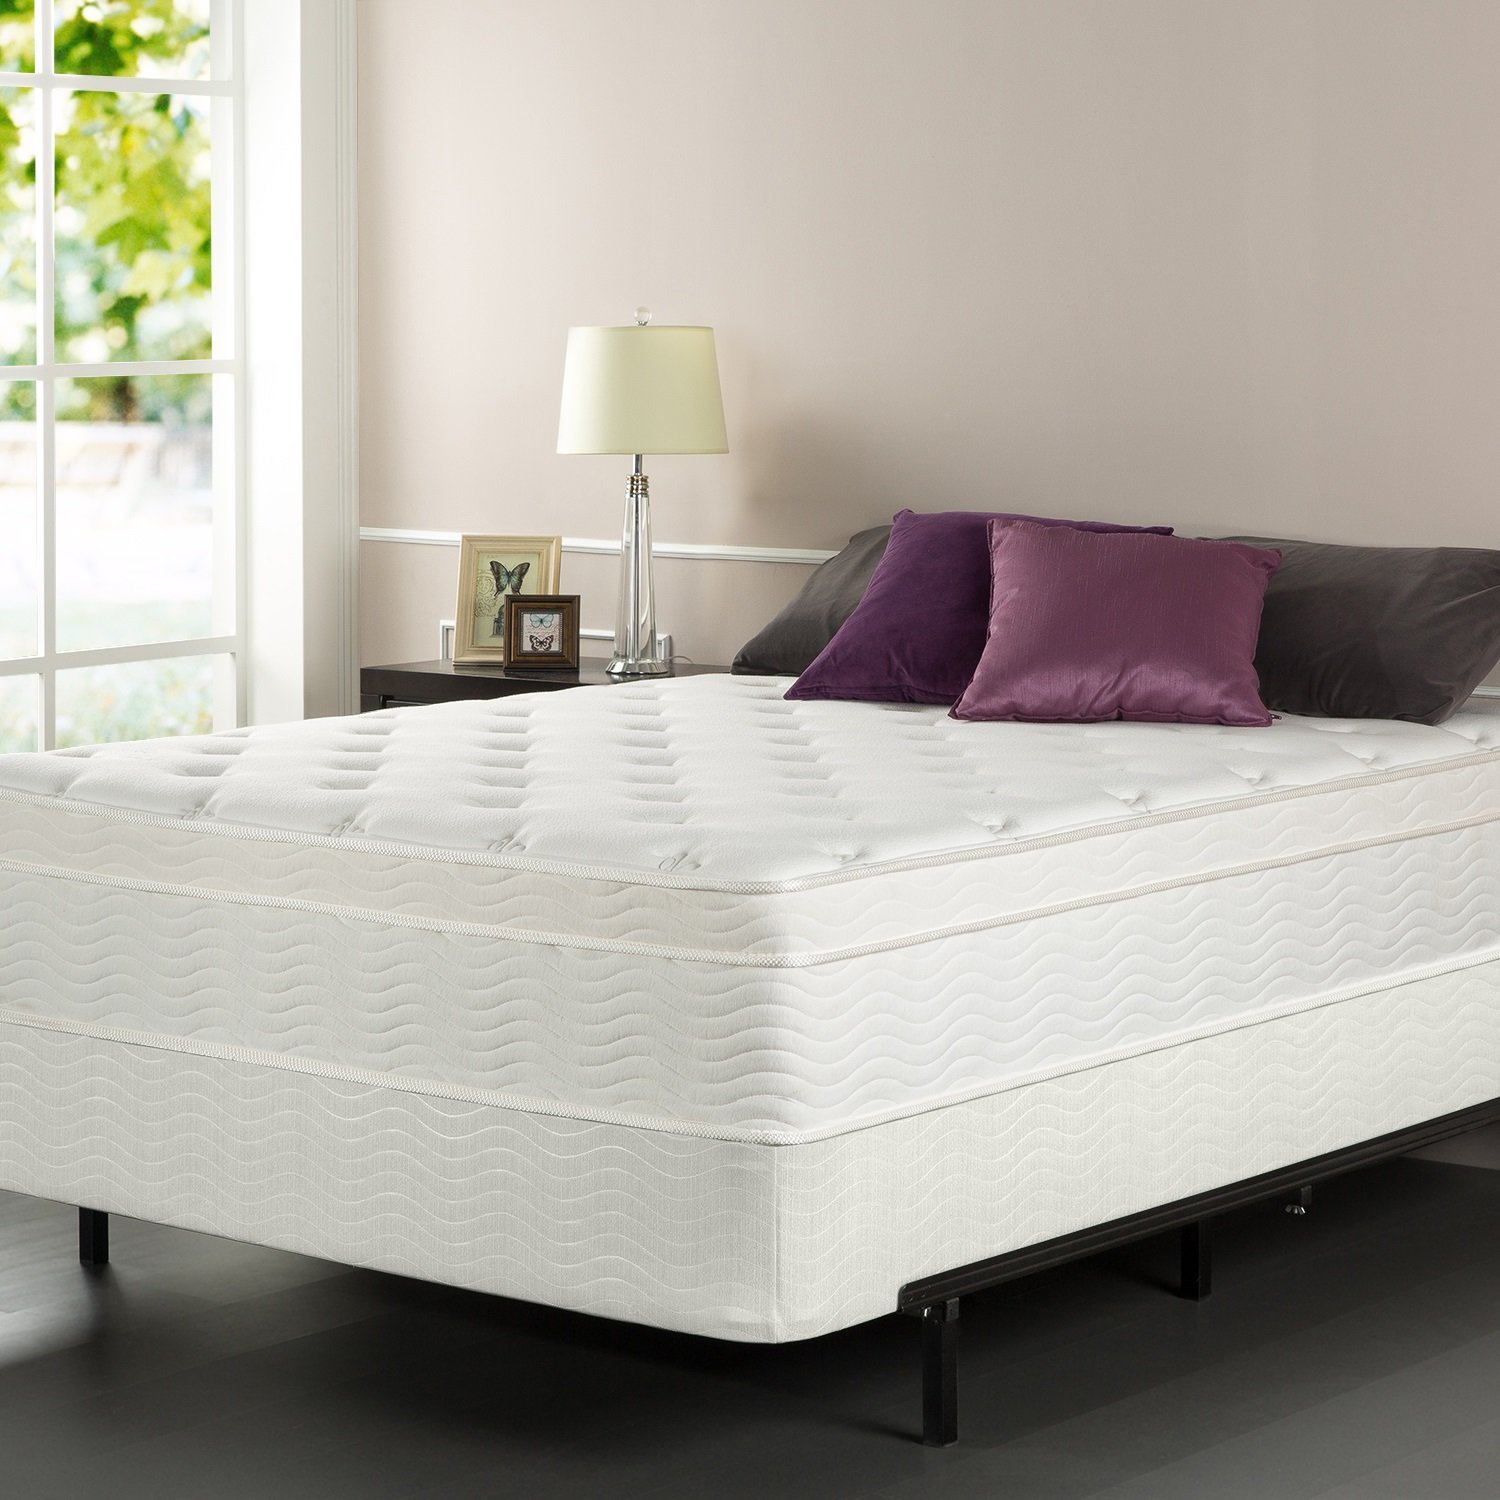 Best King Size Mattress Reviews 2018 With Relyproduct.com ...